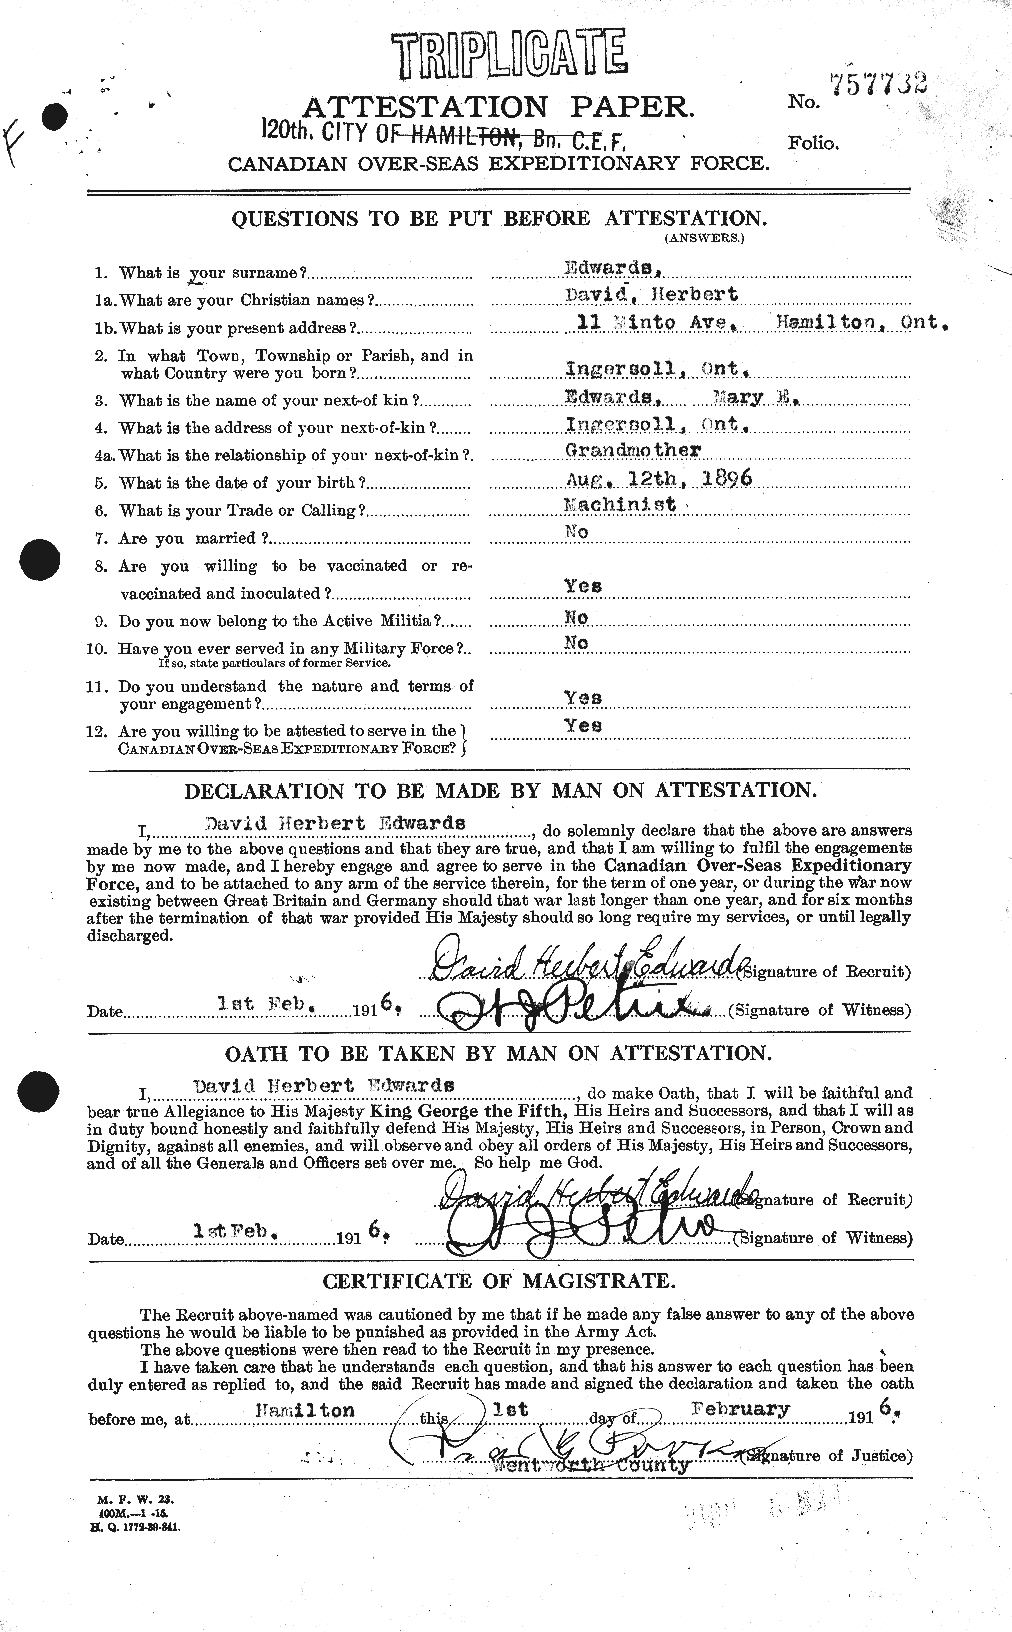 Personnel Records of the First World War - CEF 307877a